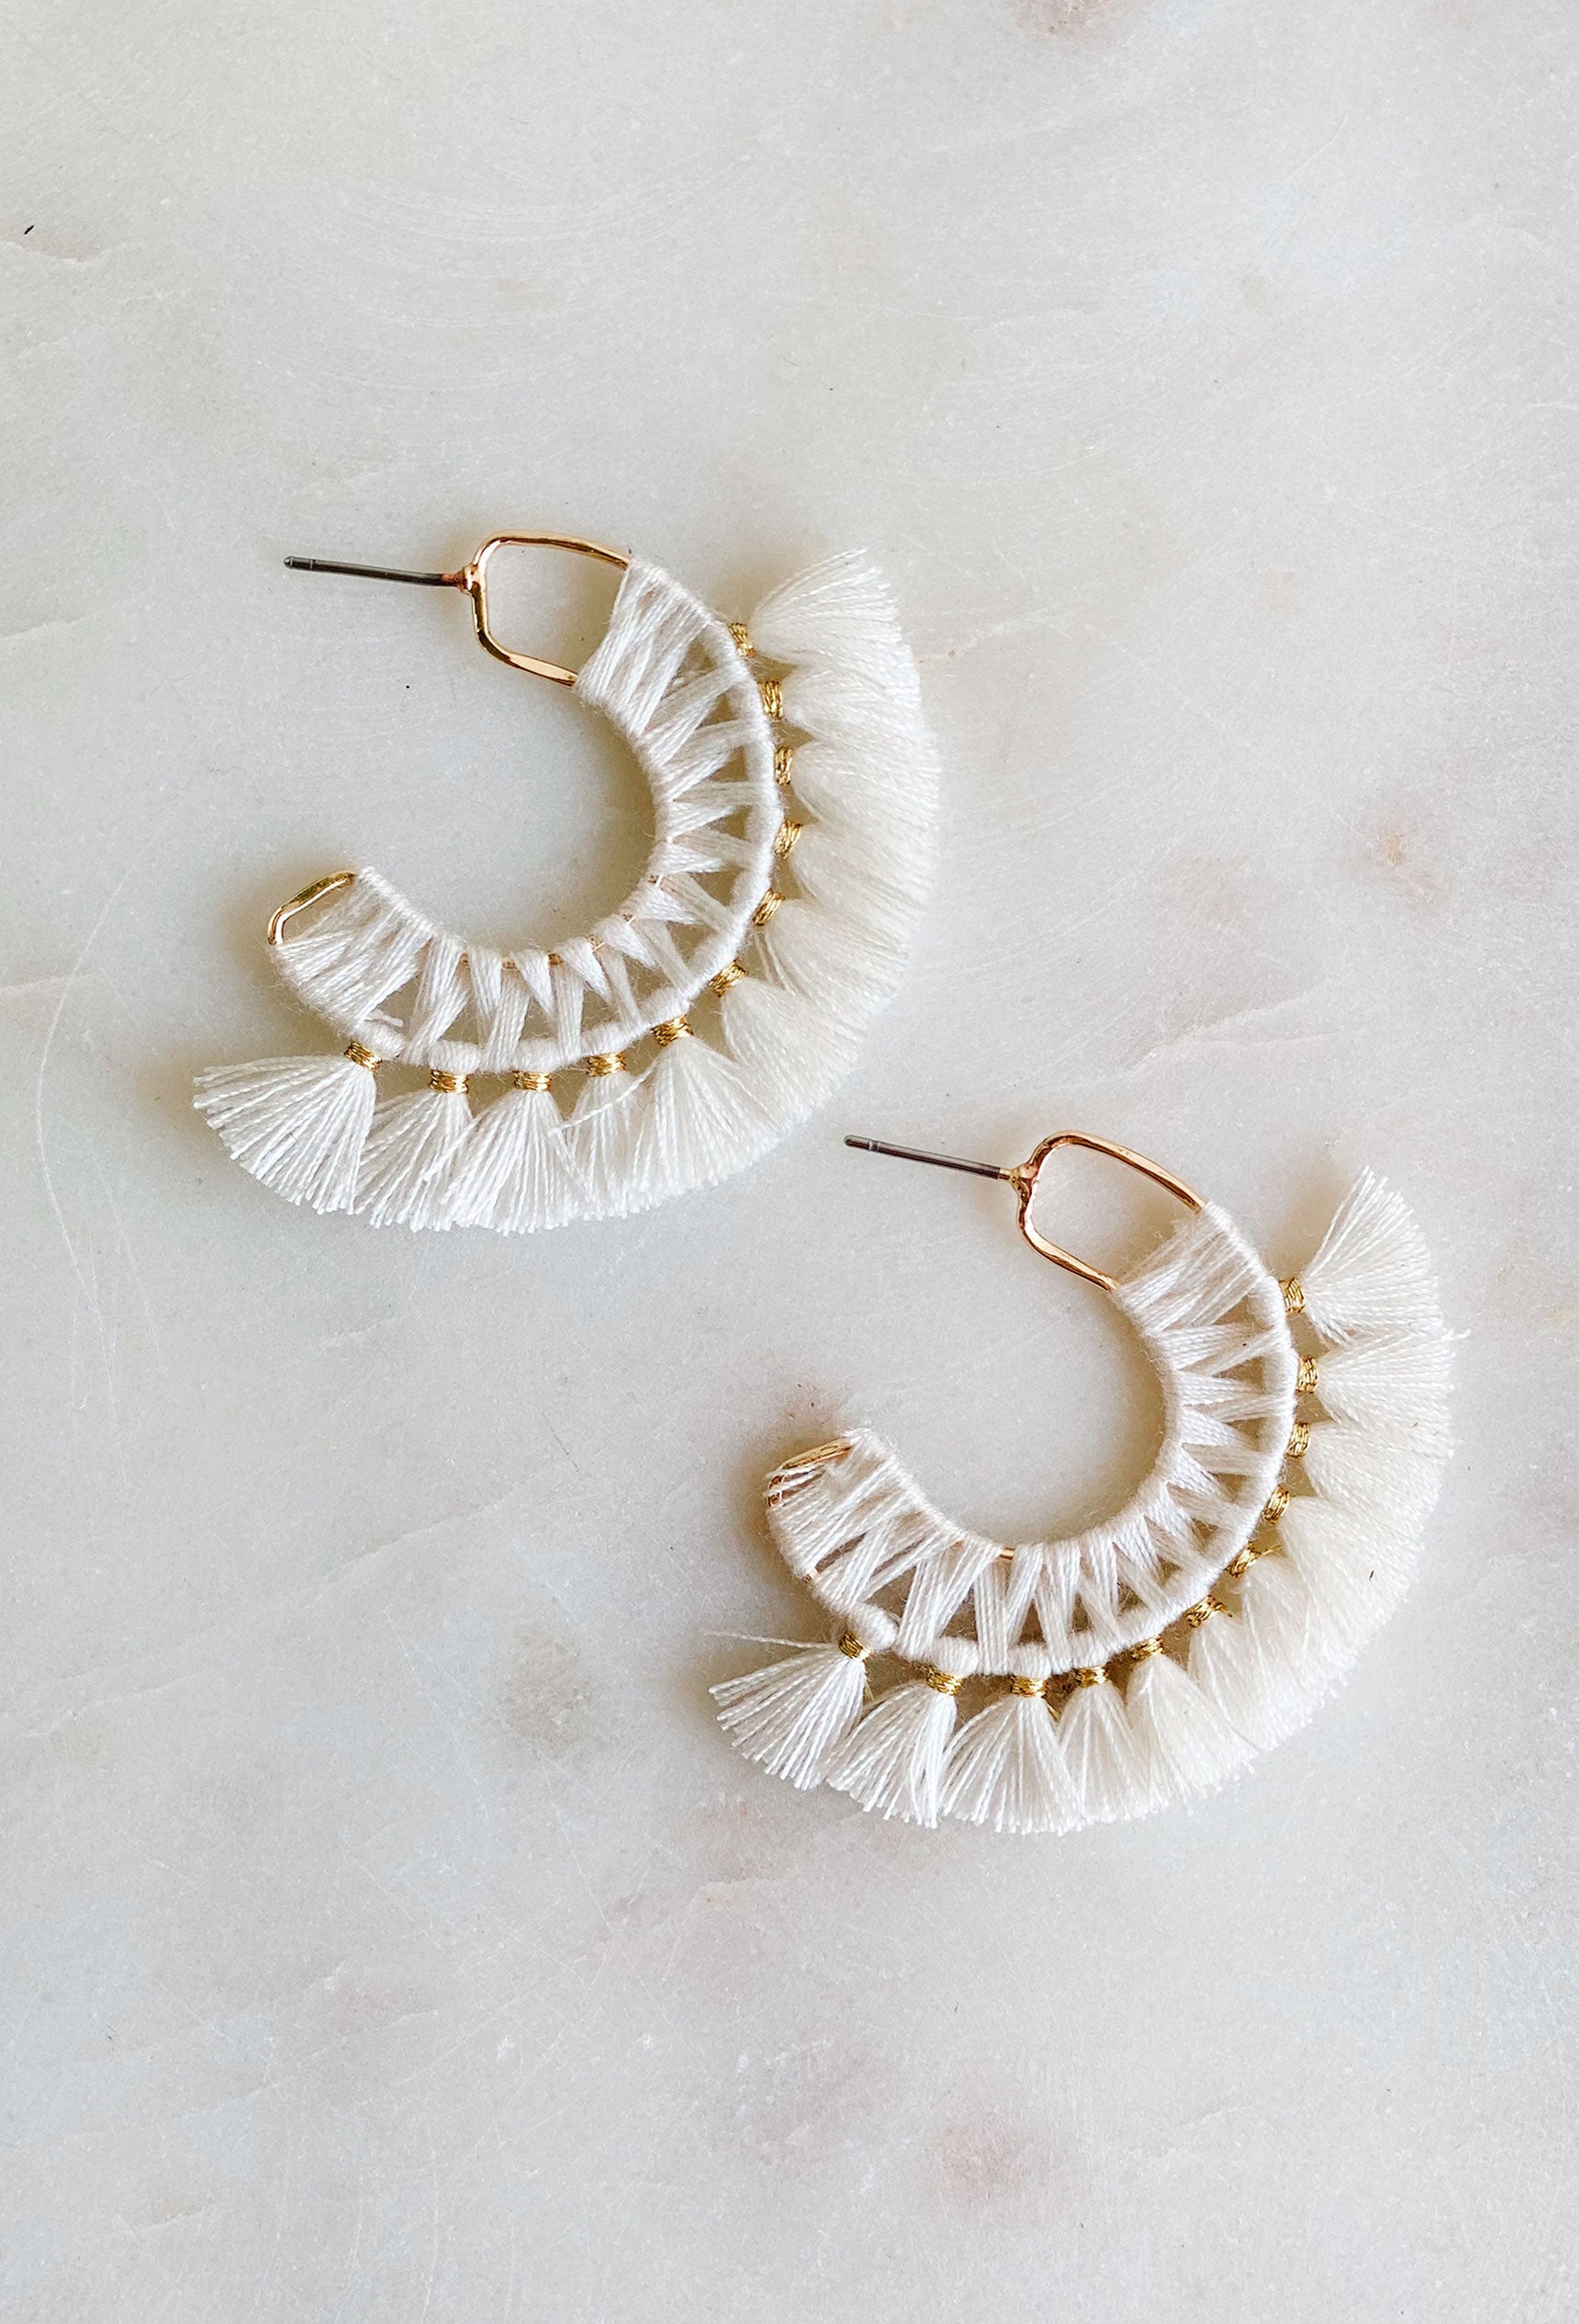 Miss Me Earrings in White, gold hoop with white fringe